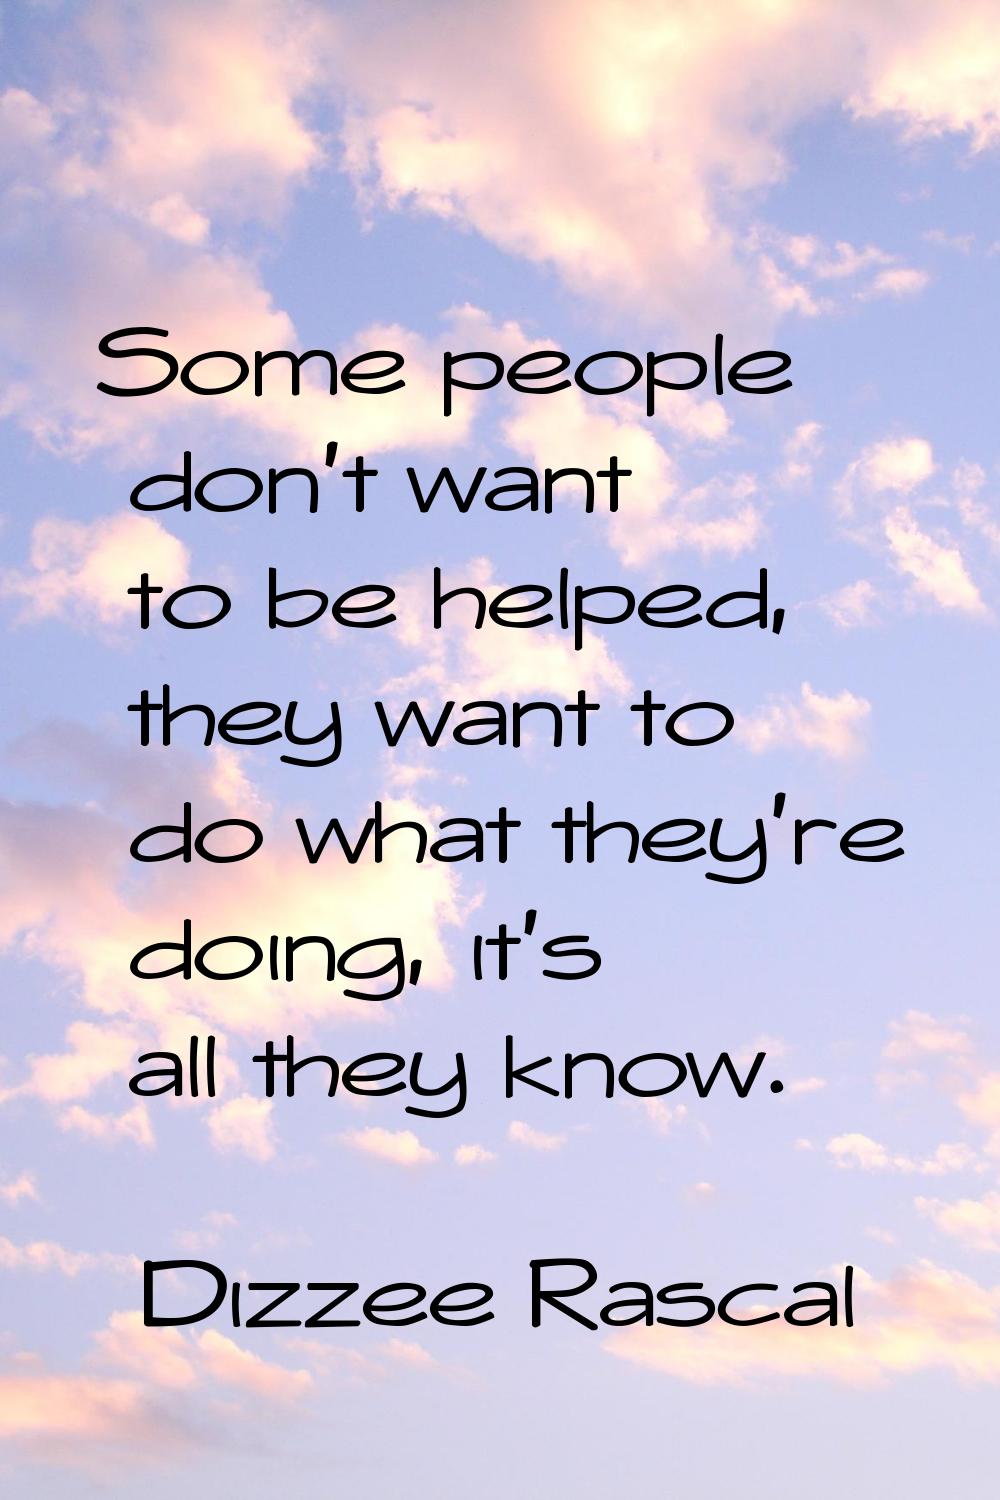 Some people don't want to be helped, they want to do what they're doing, it's all they know.